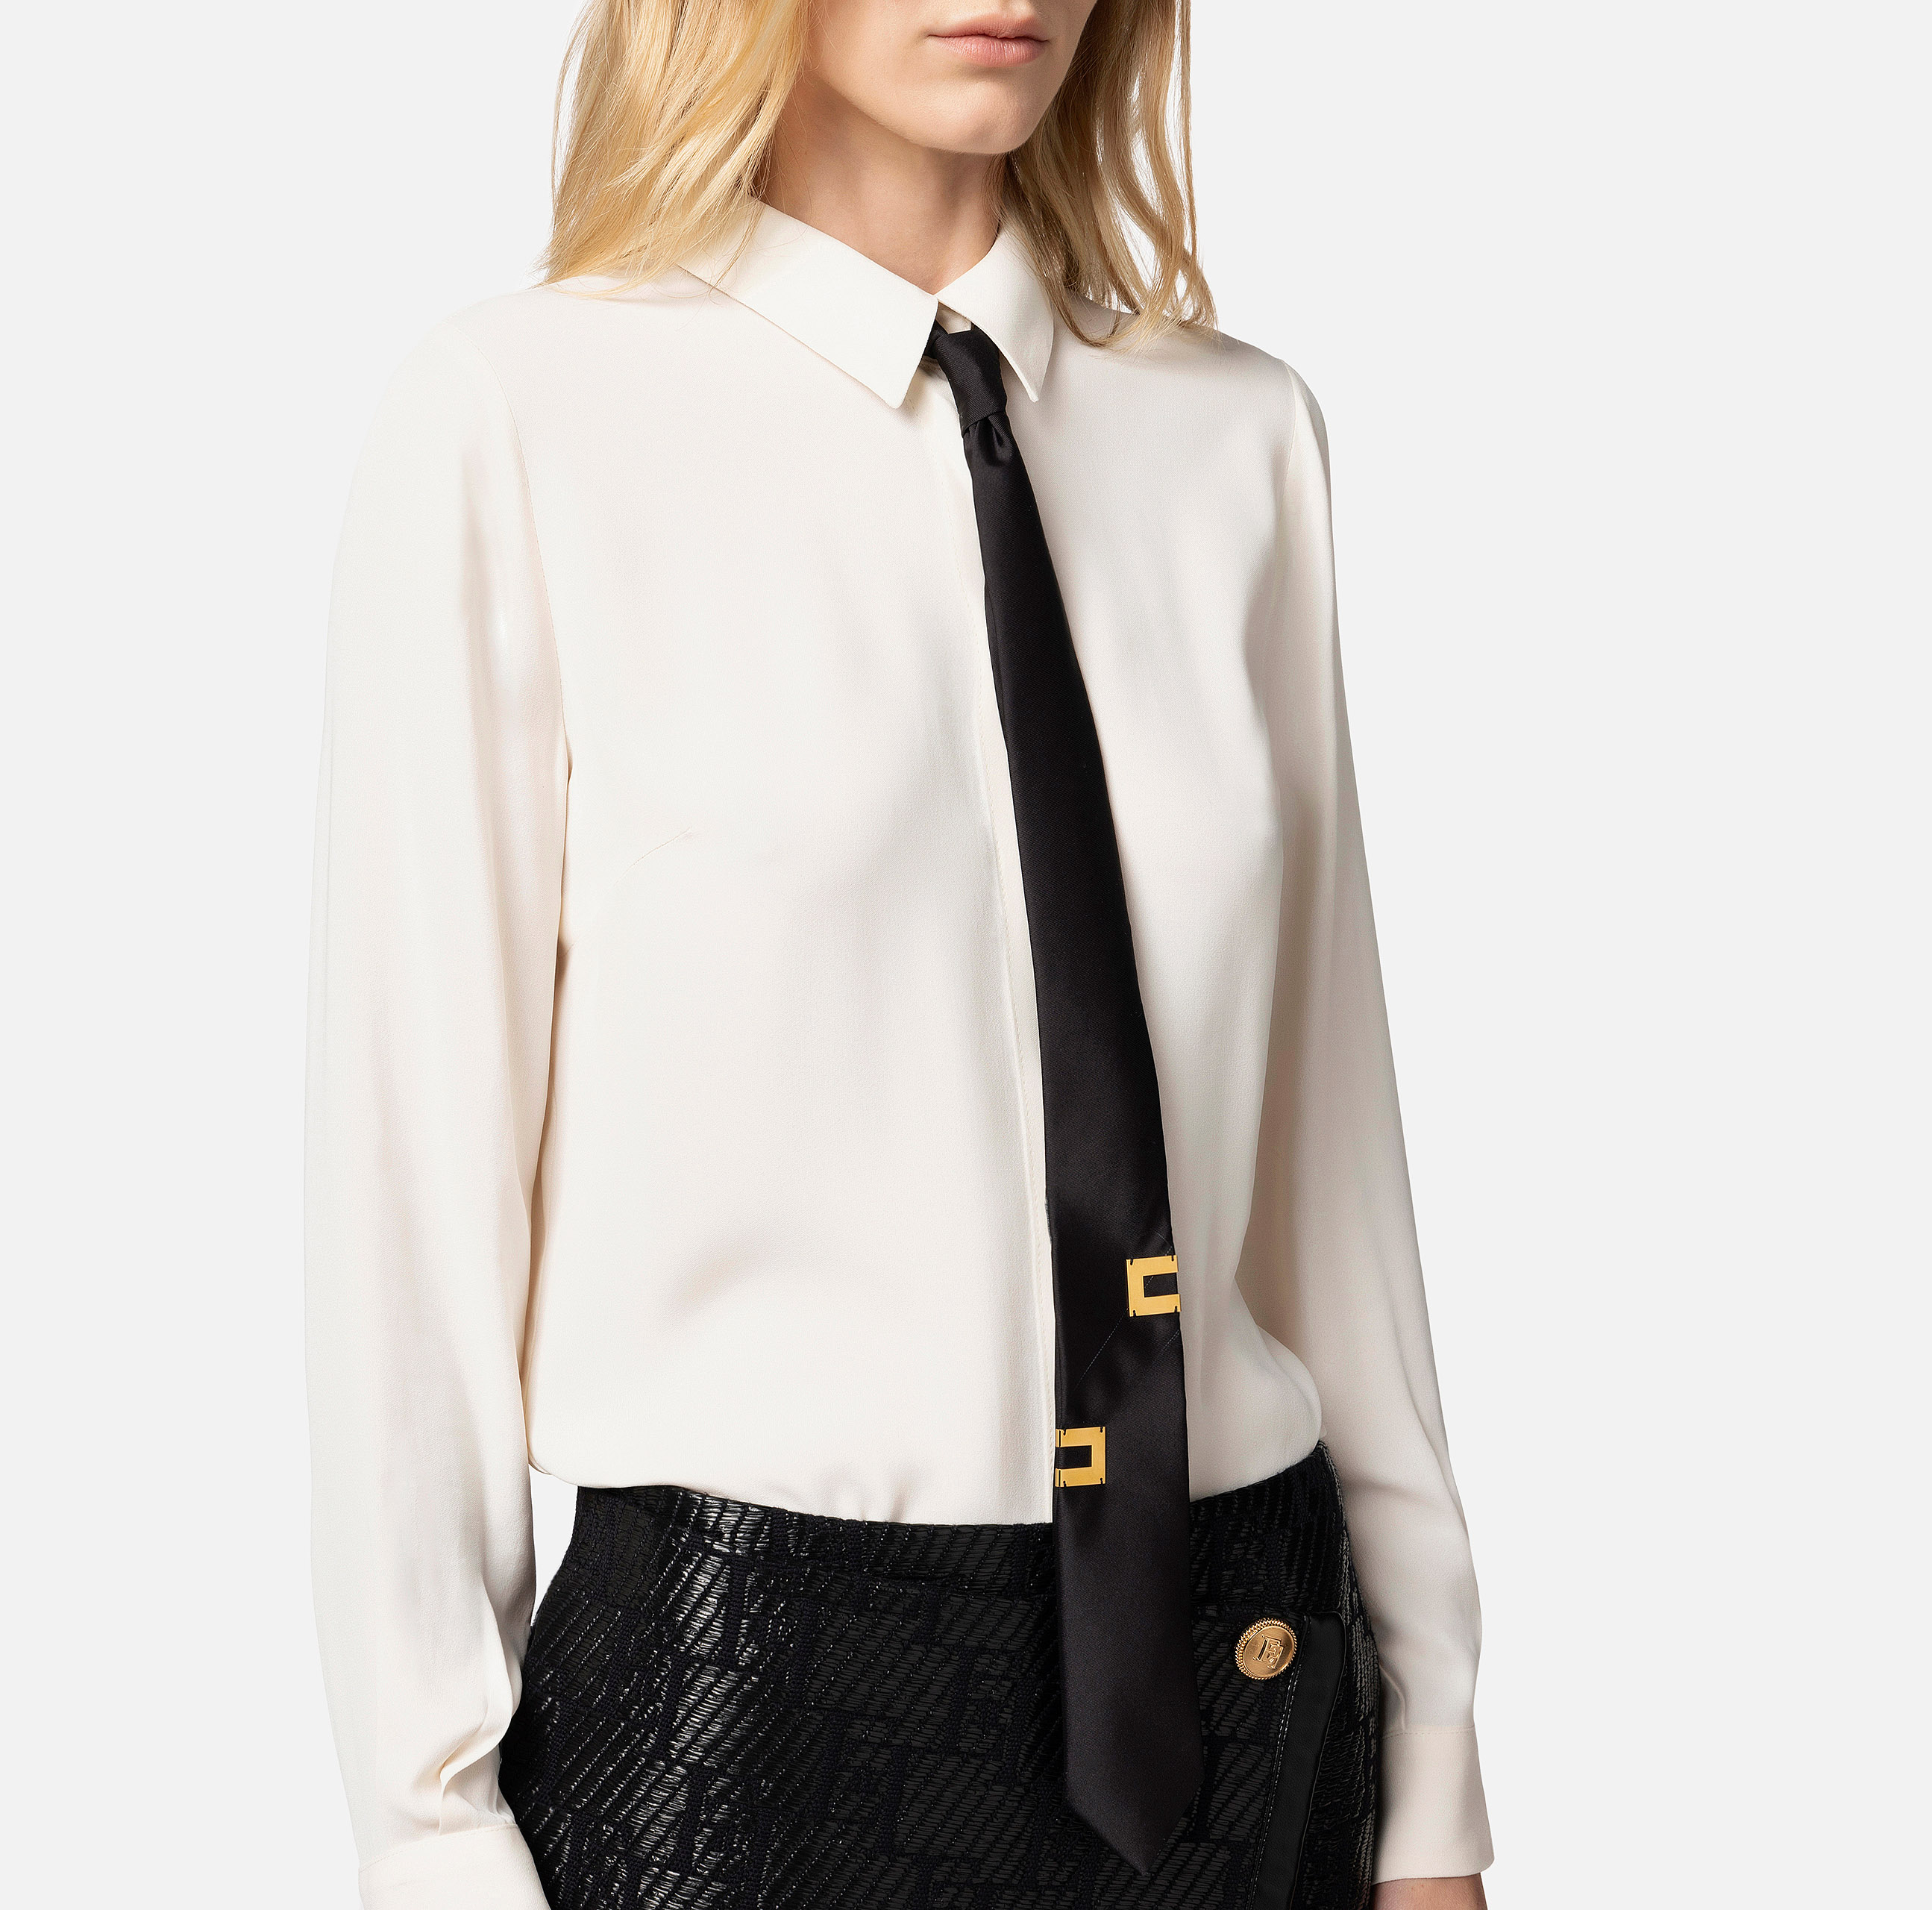 Straight blouse in viscose georgette fabric with lettering tie - Elisabetta Franchi